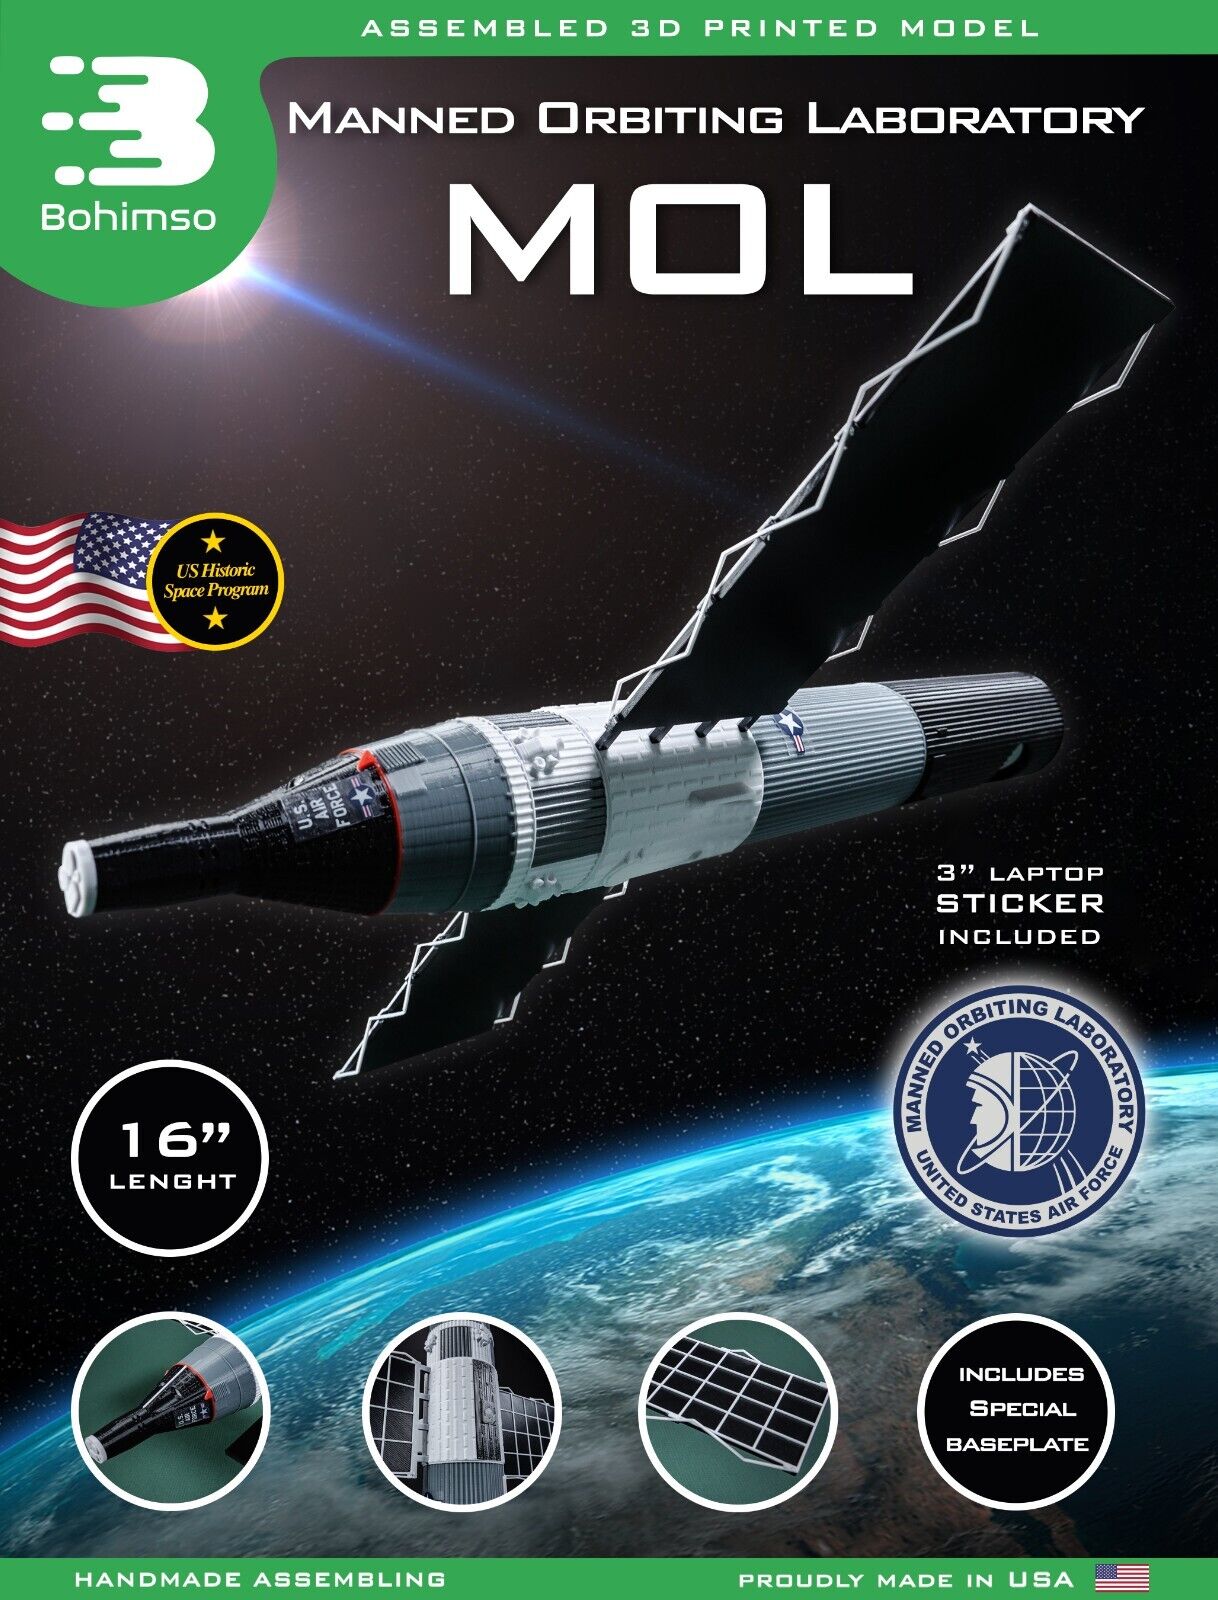 Manned Orbiting Laboratory - MOL Gemini Space Station Spaceships Space Station